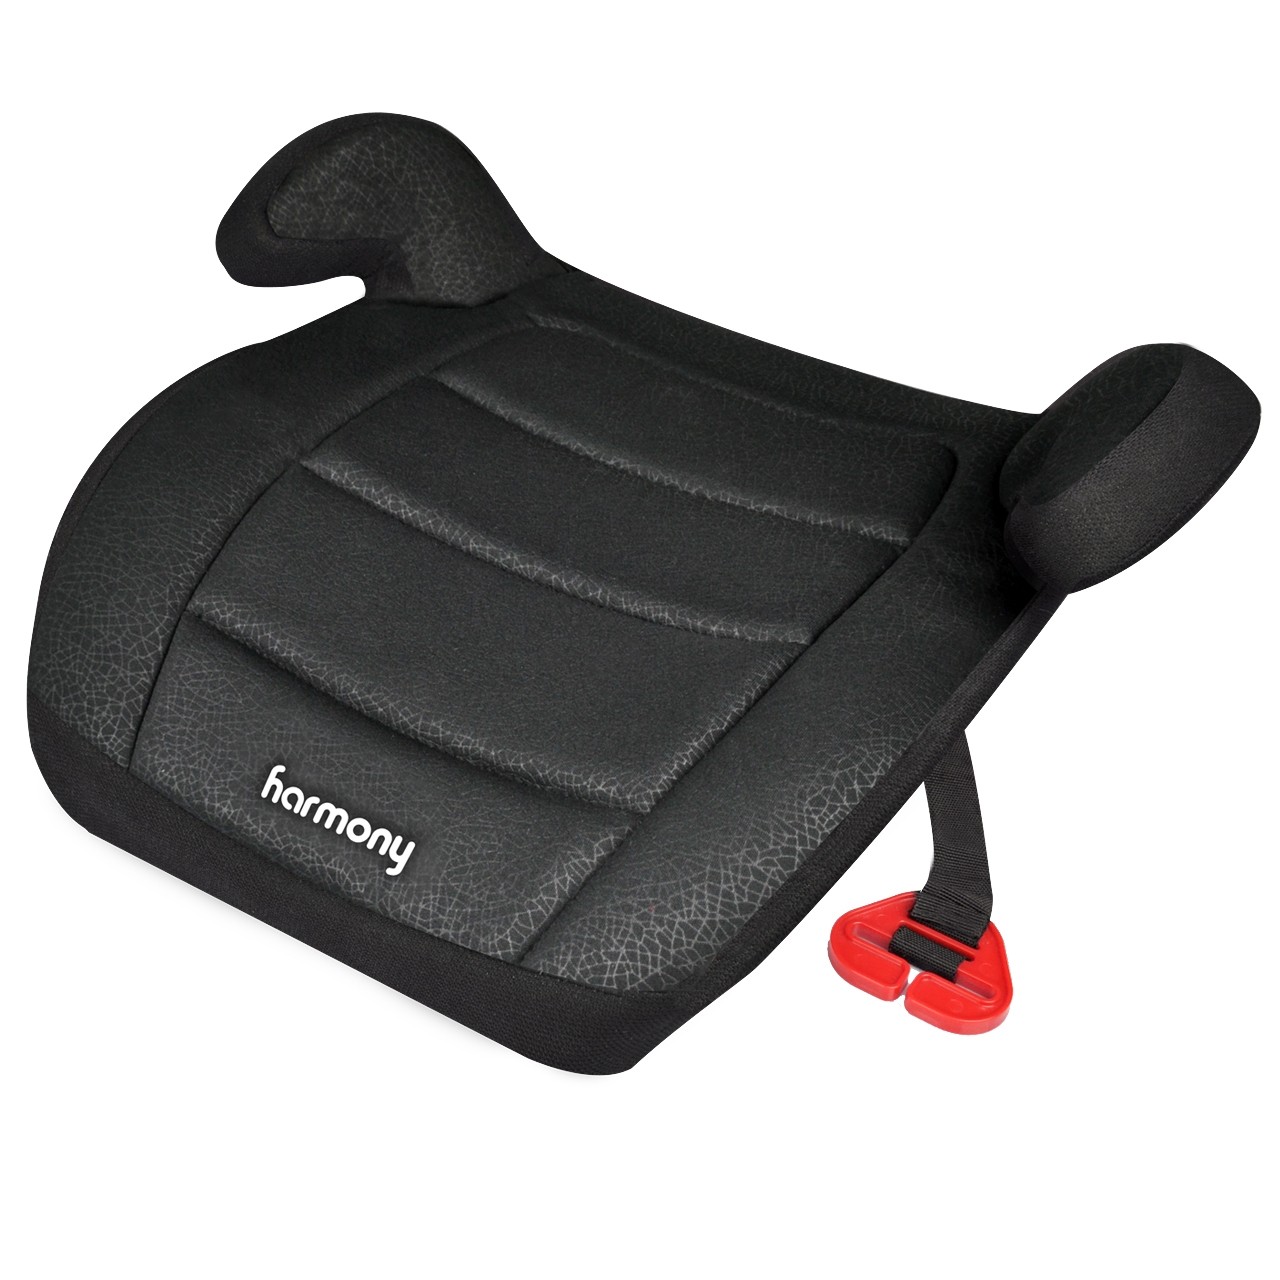  Bandwagon Adult/Driver Car Booster Seat for Visibility - Soft  Comfortable Black Poly Cover : Automotive